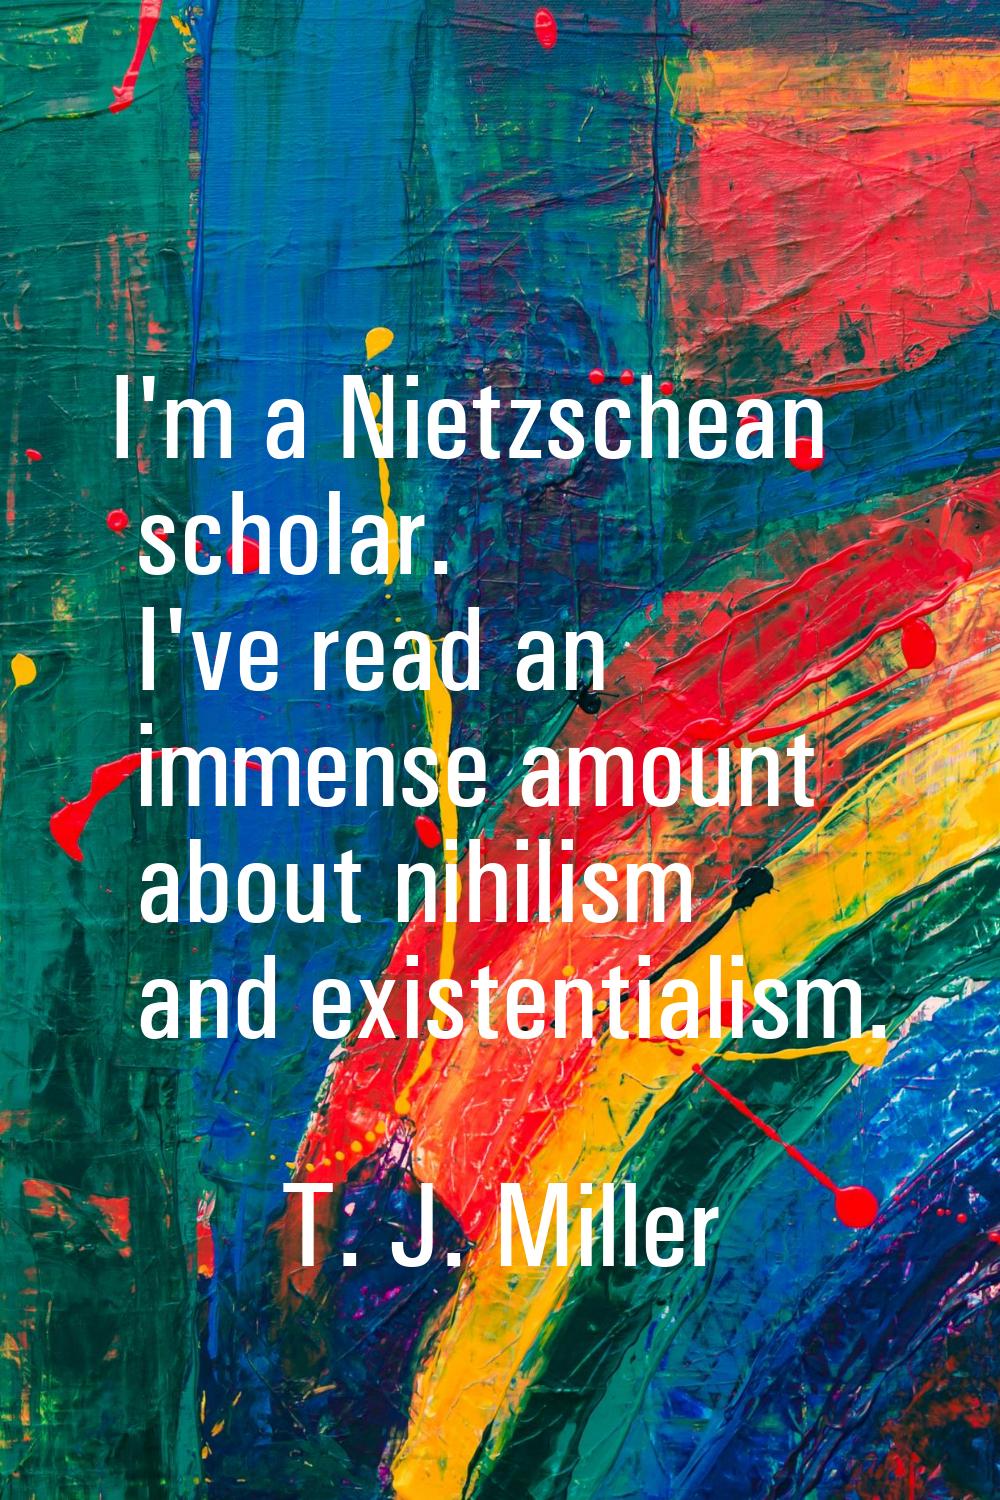 I'm a Nietzschean scholar. I've read an immense amount about nihilism and existentialism.